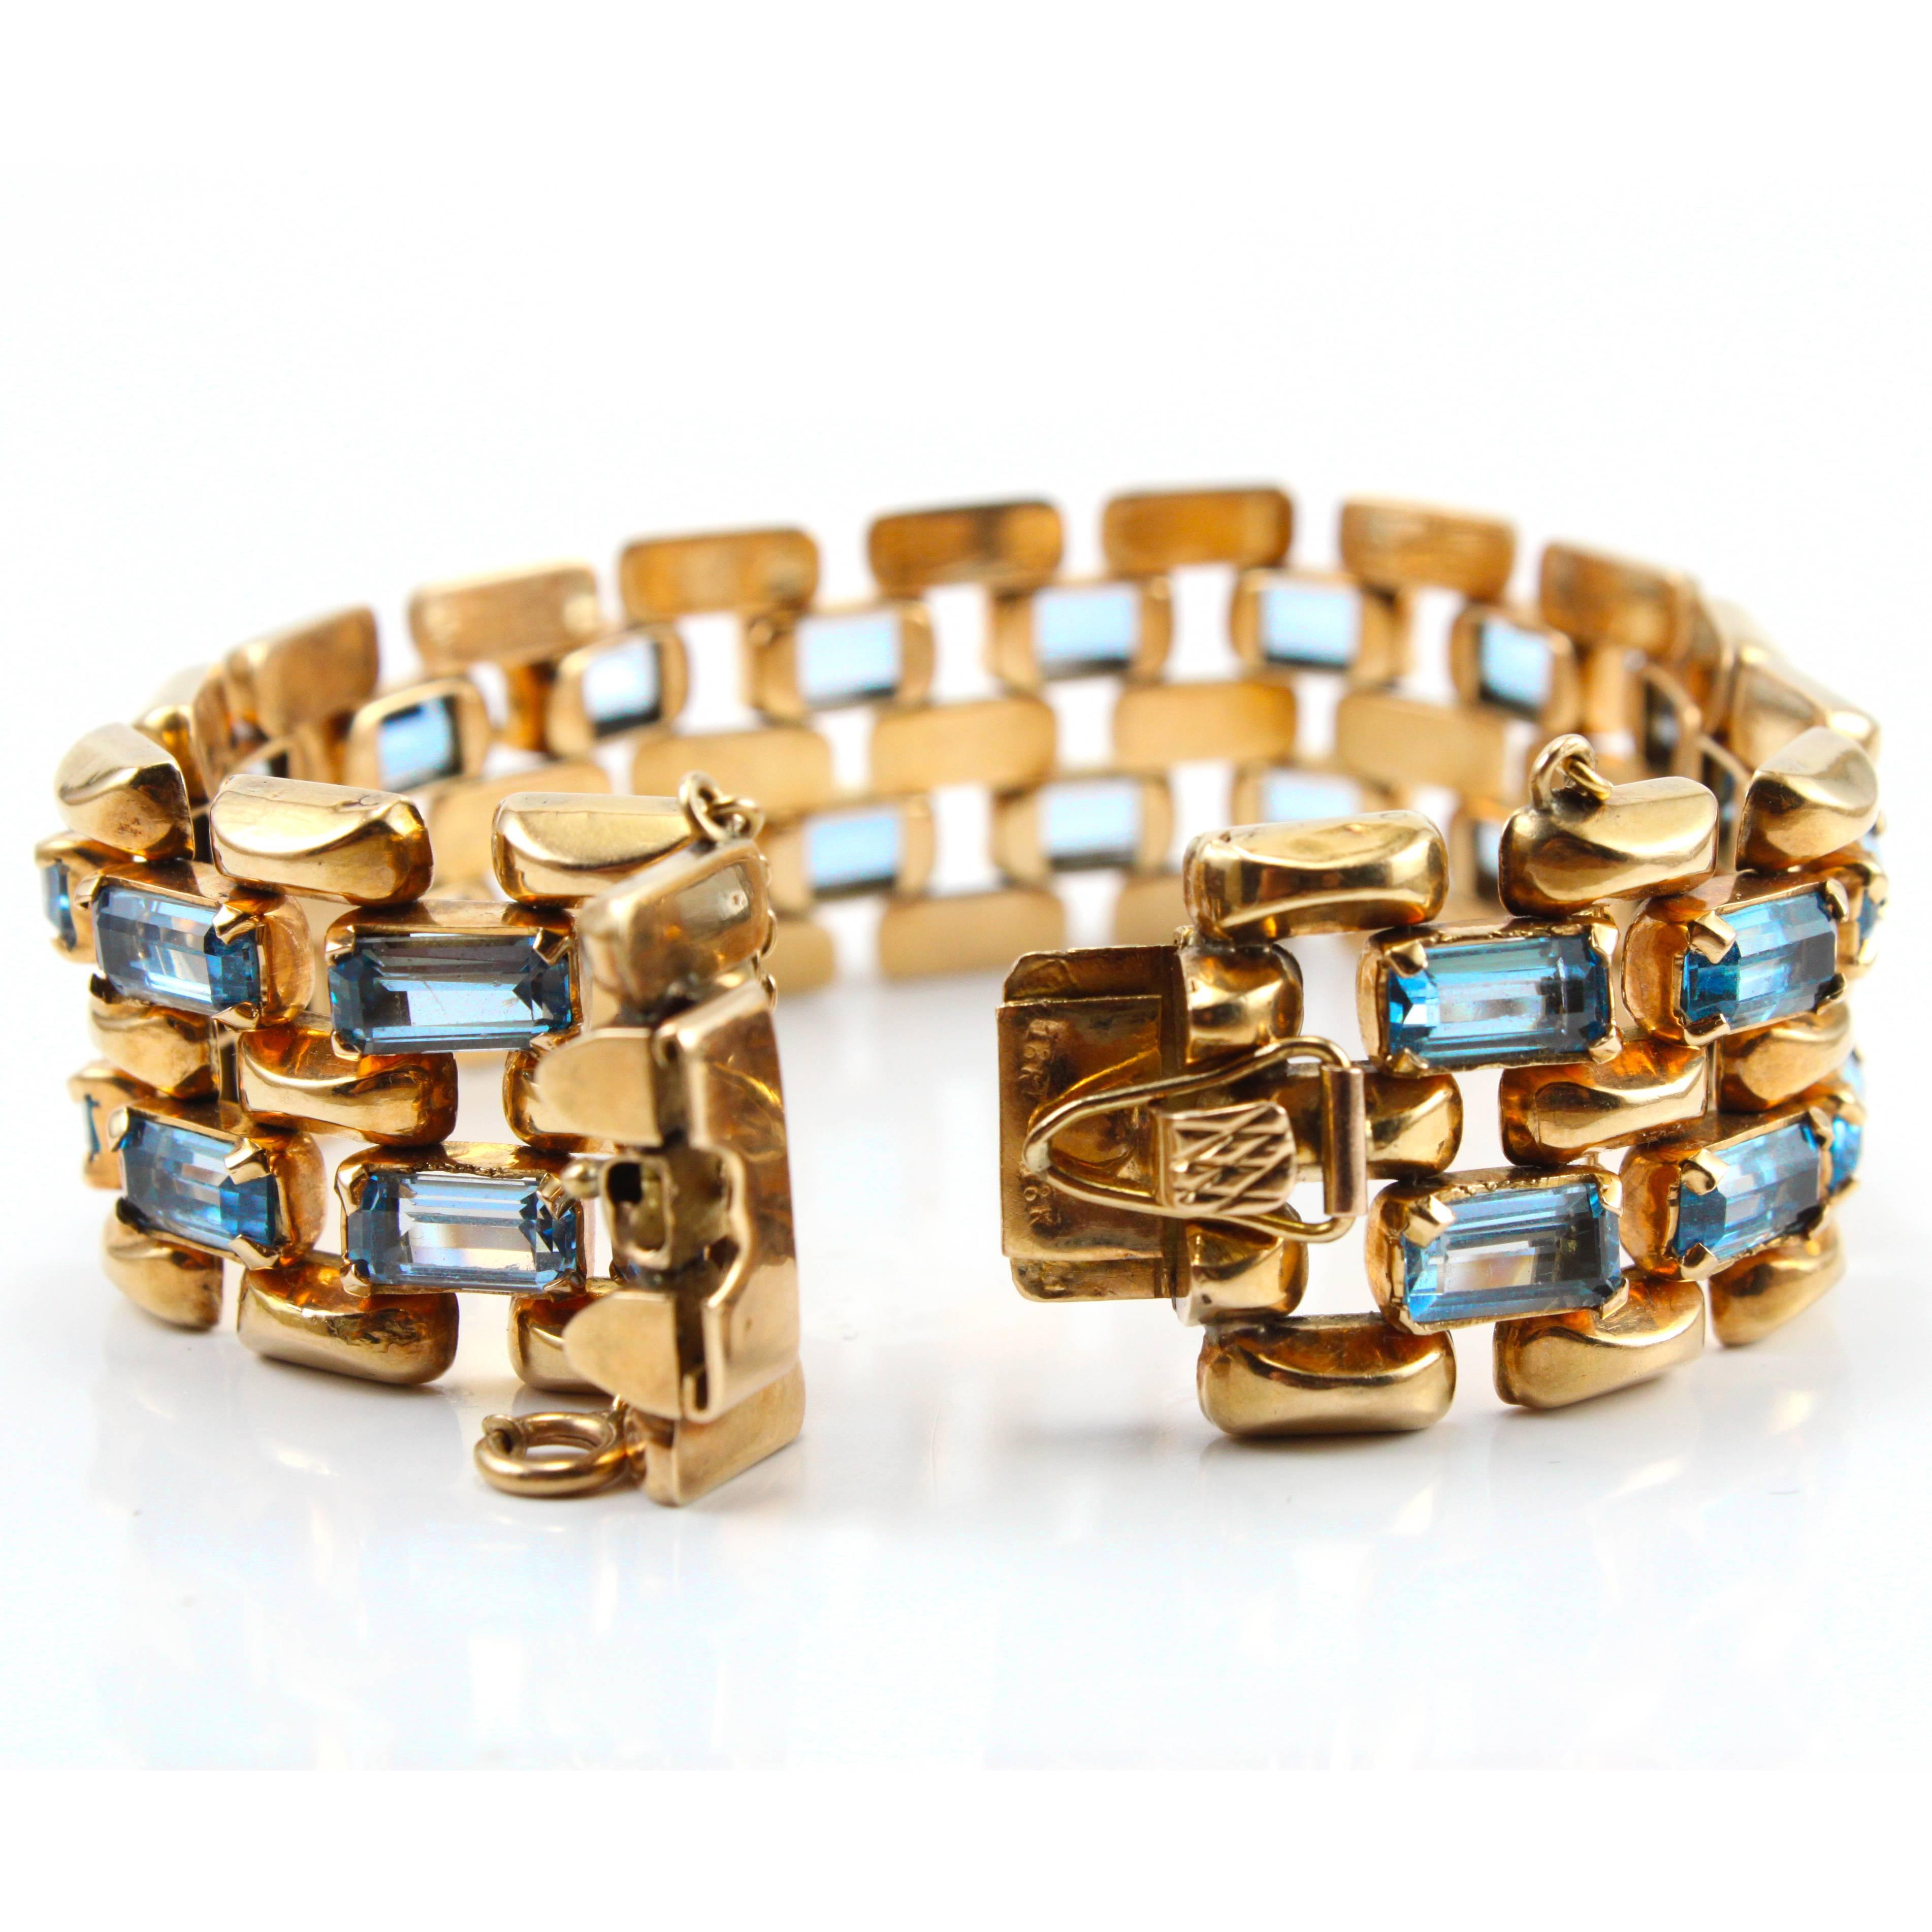 A very chic Retro Aquamarine and Gold Link Bracelet, ca. 1940s

The bracelet comprises 32 matched Aquamarines and has a flexible link design, which gives the bracelet a light yet sturdy feel.
It is made in 18k yellow gold.

